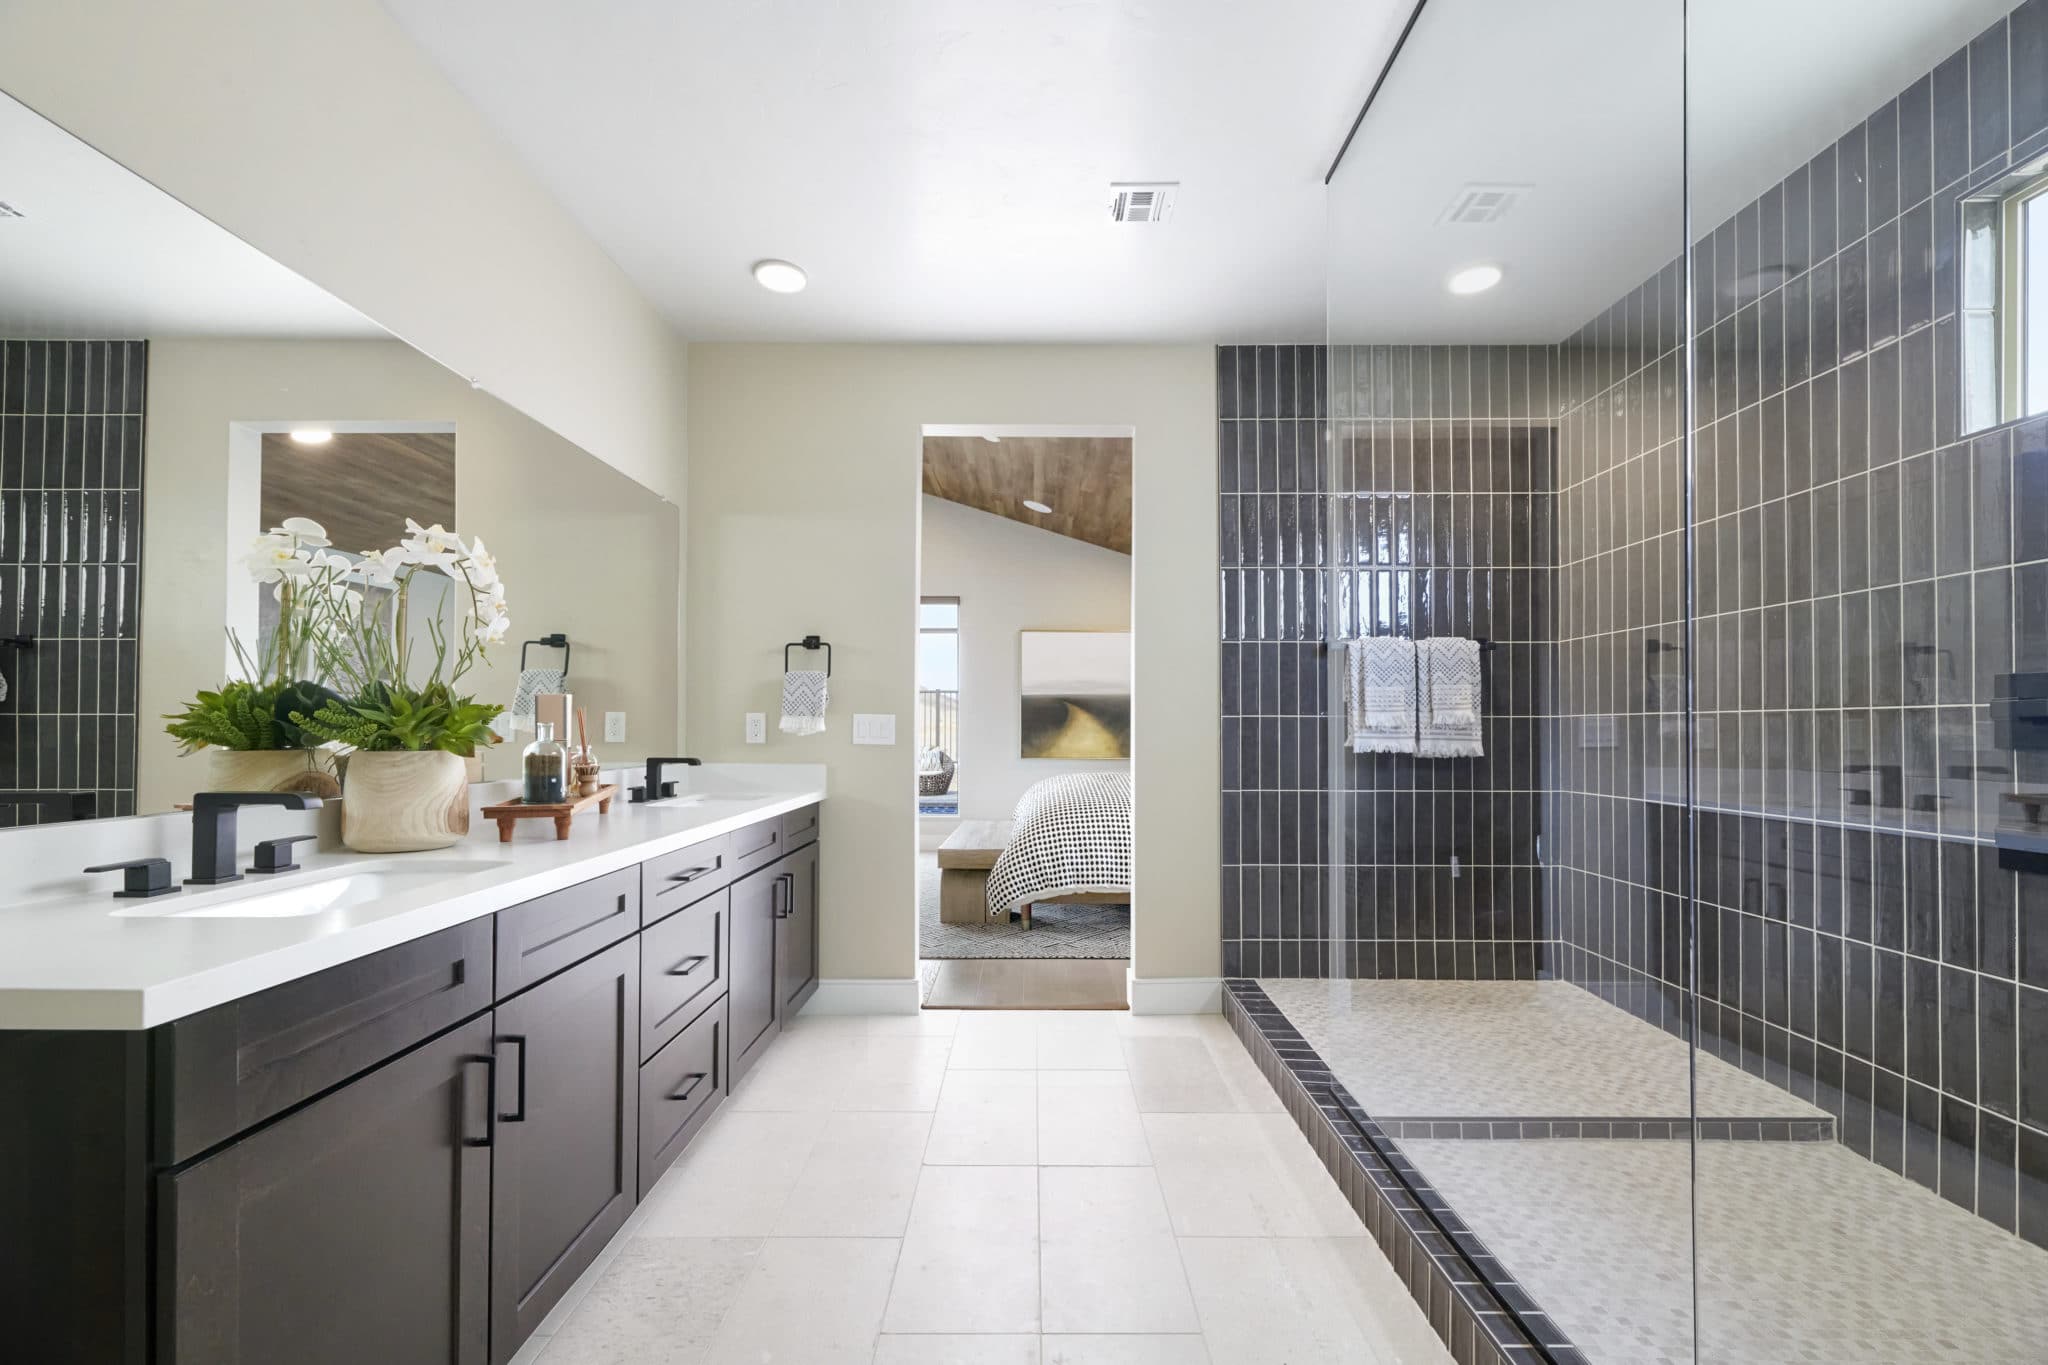 Primary Bathroom of Plan 1 at Kings Canyon by Tri Pointe Homes